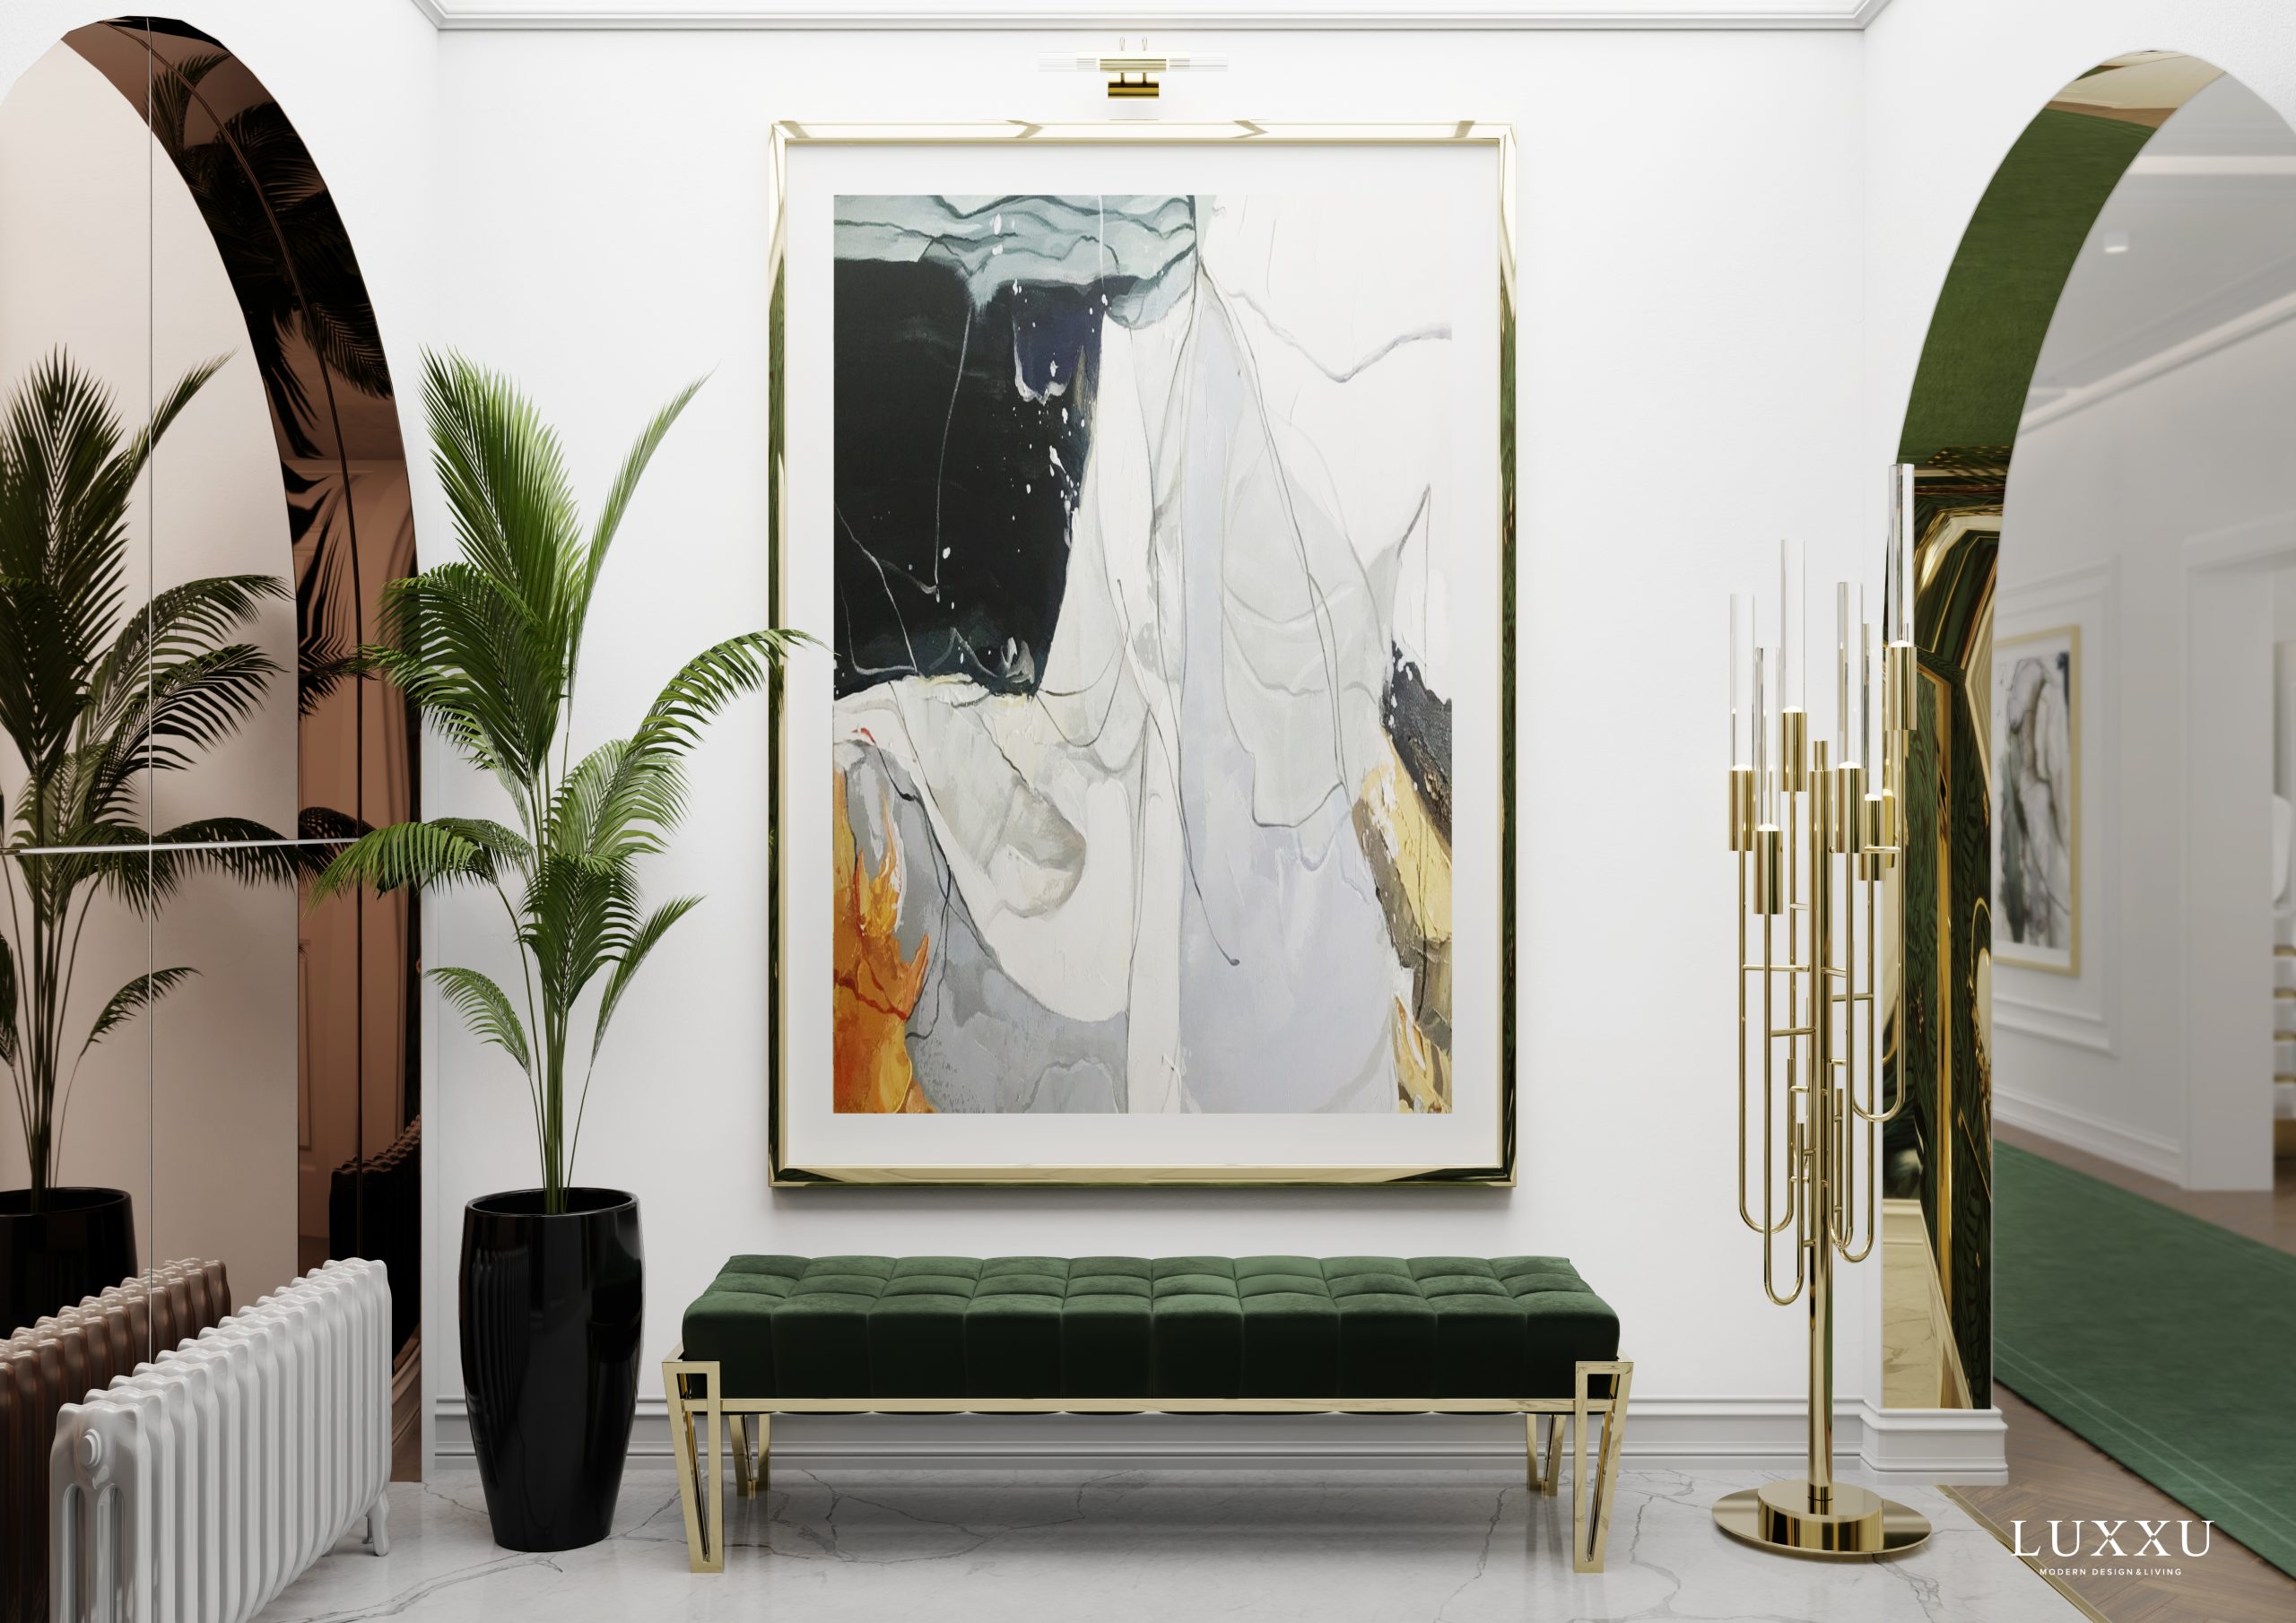 As soon as you come through the entrance of this Parisian apartment, you can sense a wonderful creative vibe, as you are met by a gorgeous painting.